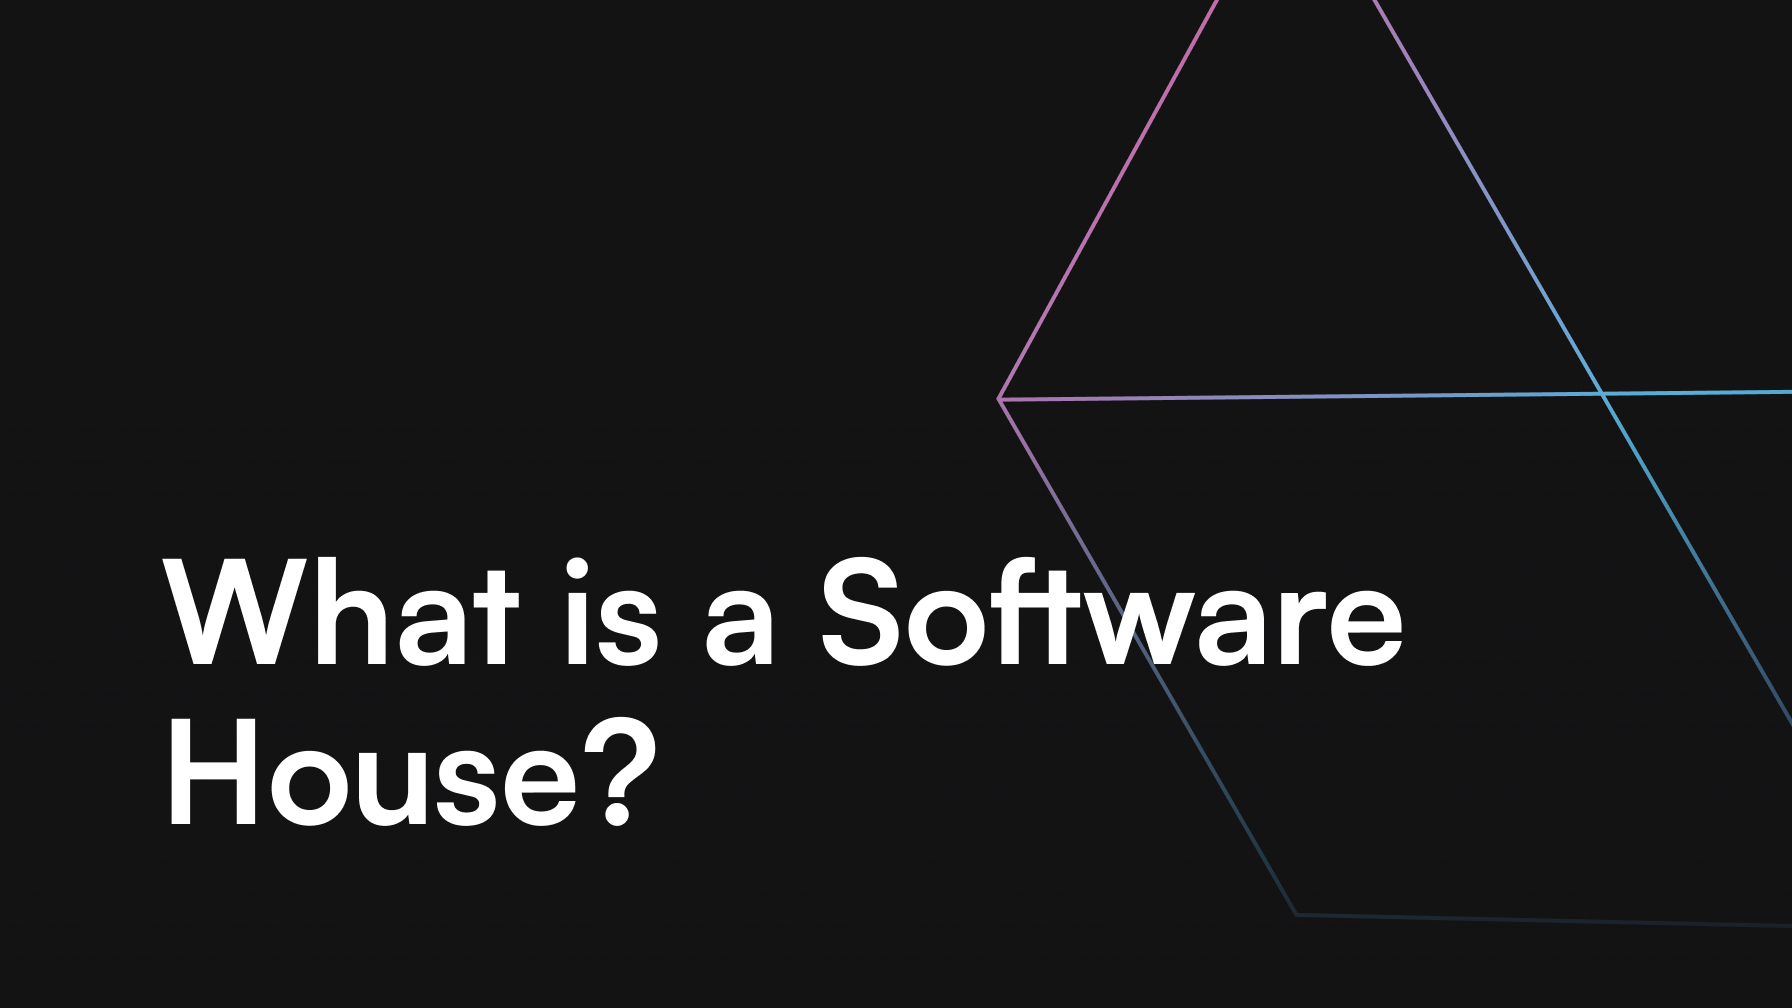 What is a Software House?